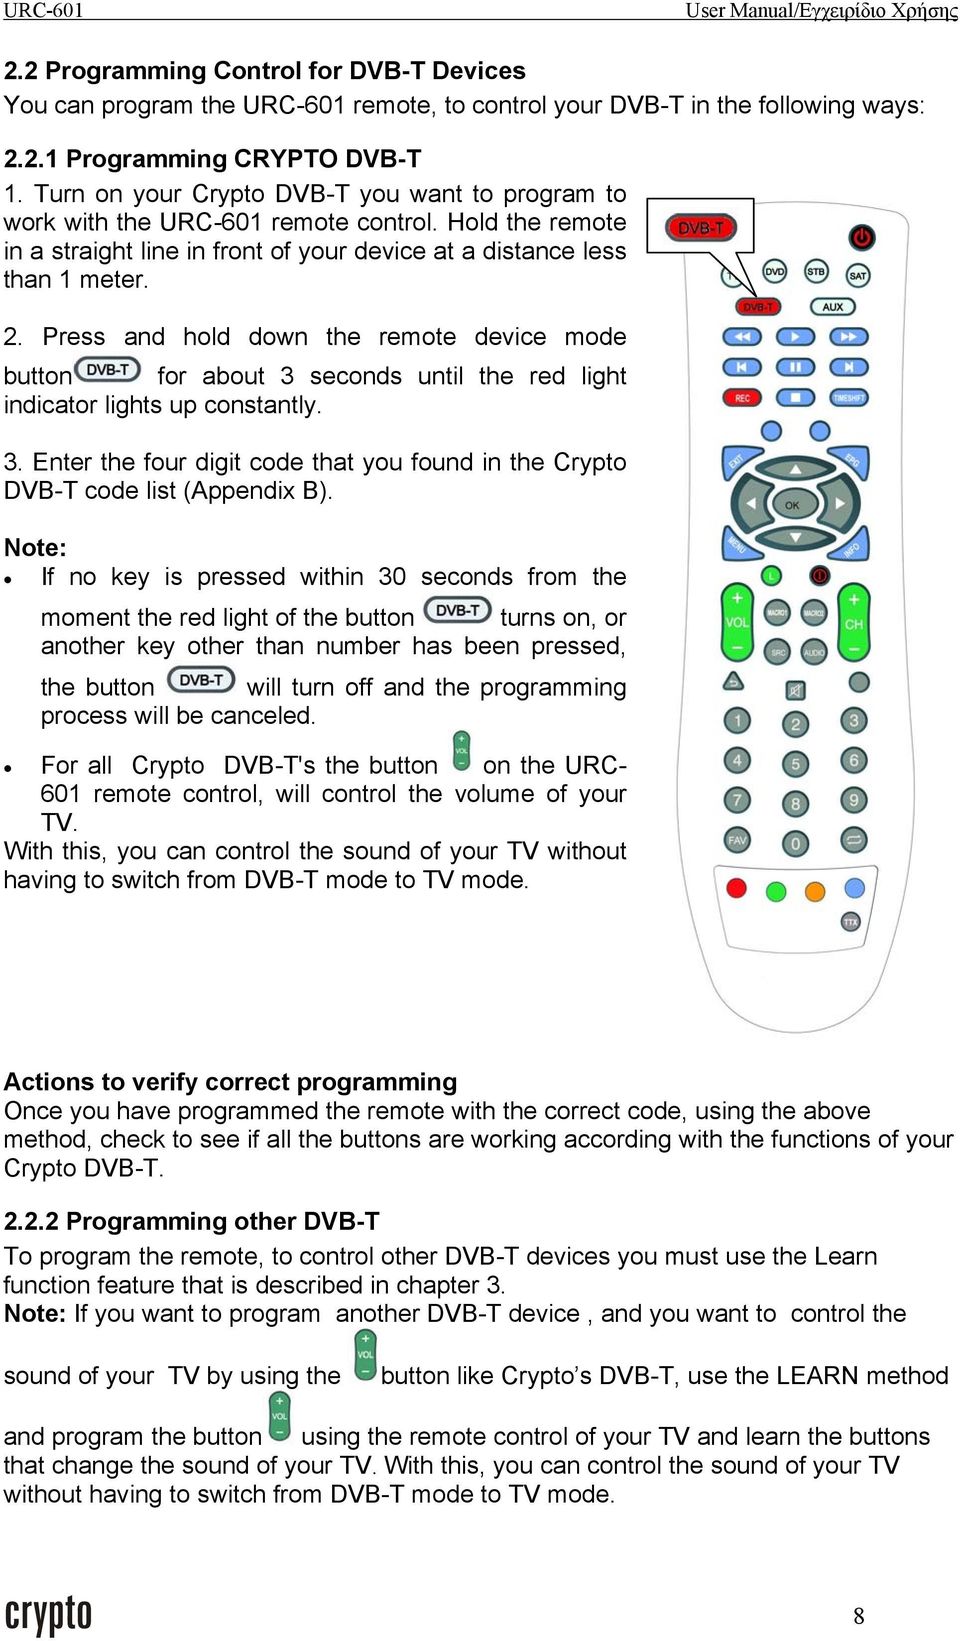 Press and hold down the remote device mode button for about 3 seconds until the red light indicator lights up constantly. 3. Enter the four digit code that you found in the Crypto DVB-T code list (Appendix B).